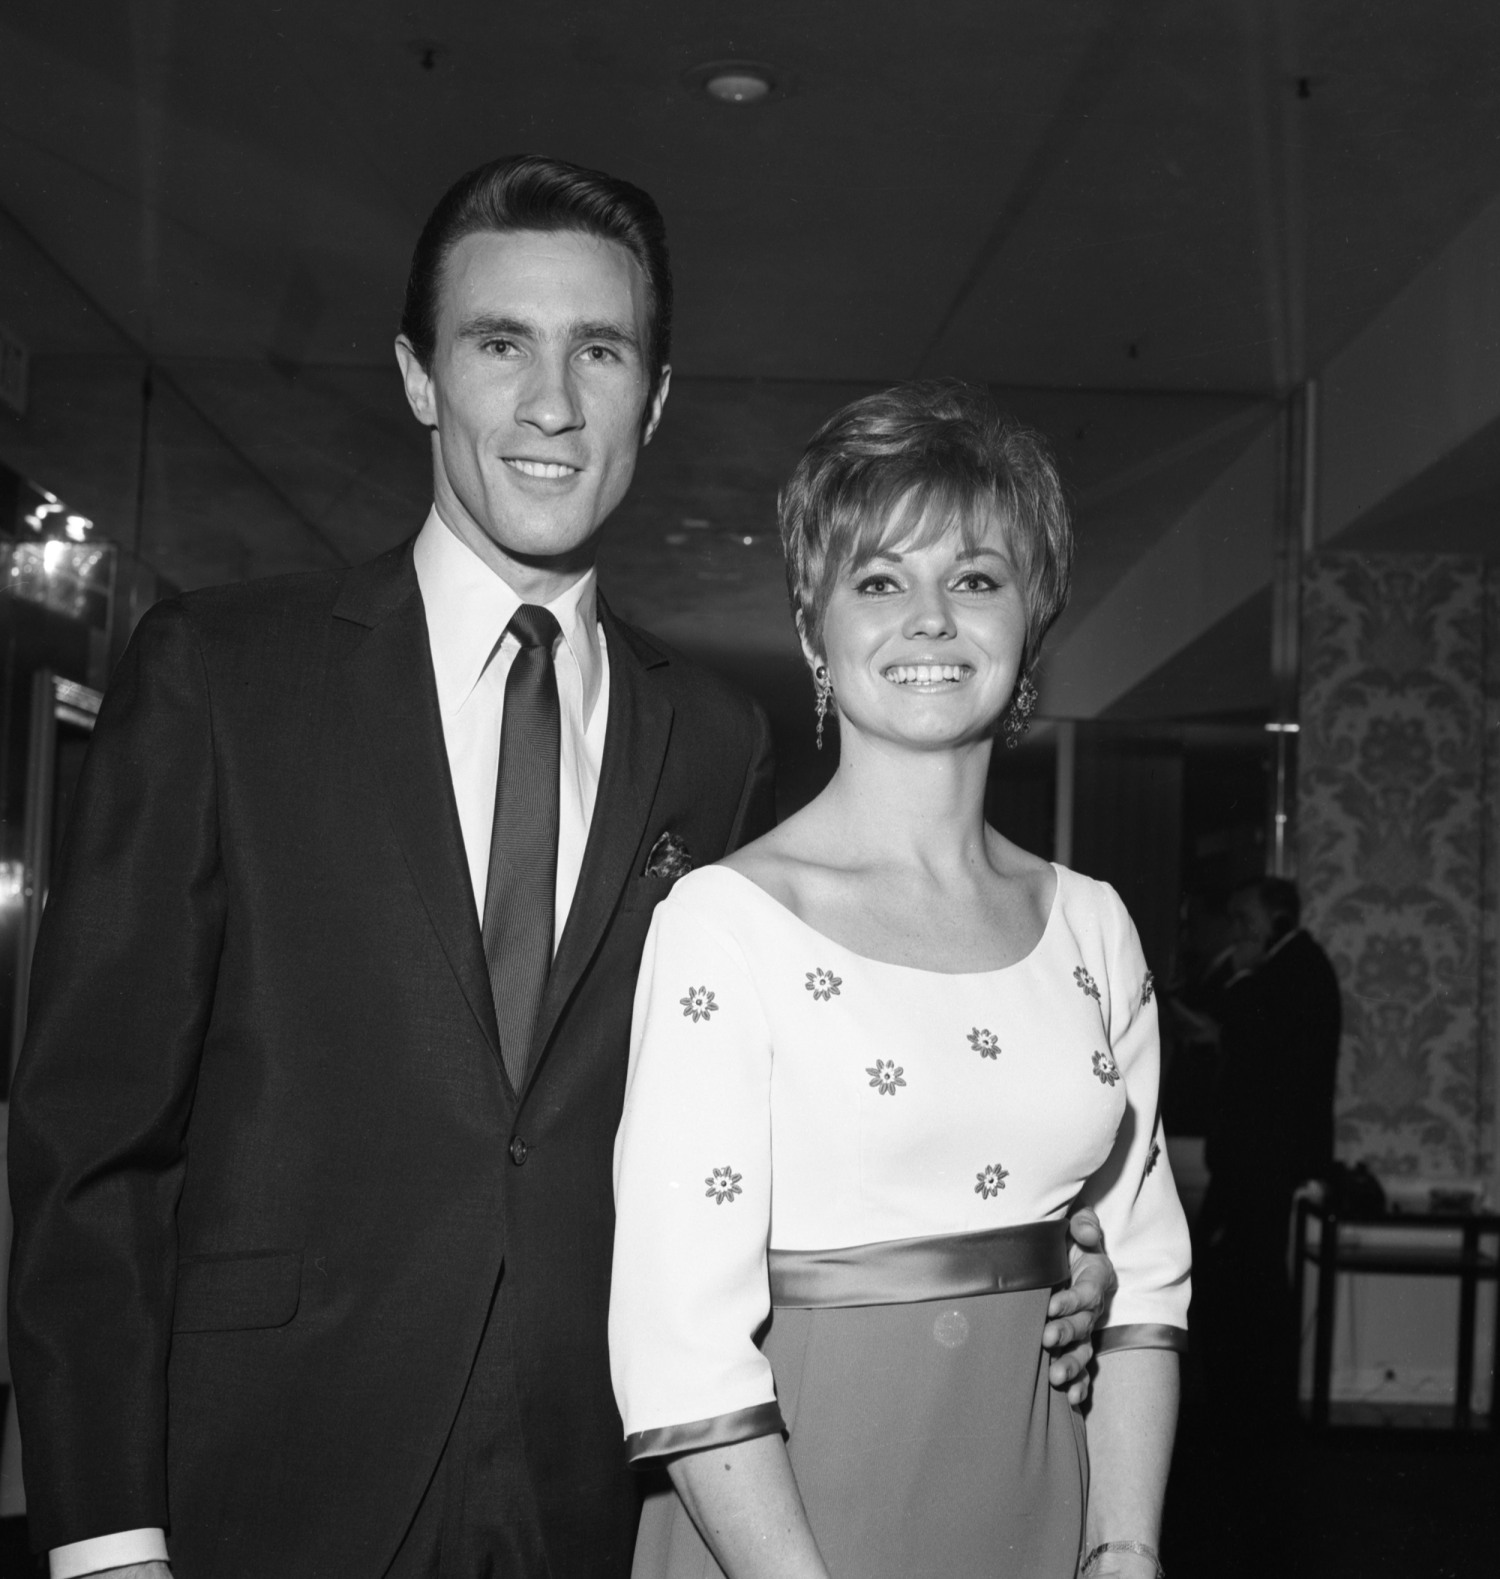 Murder of Righteous Brothers Singers Ex-Wife Karen Klaas Solved 40 Years Later image